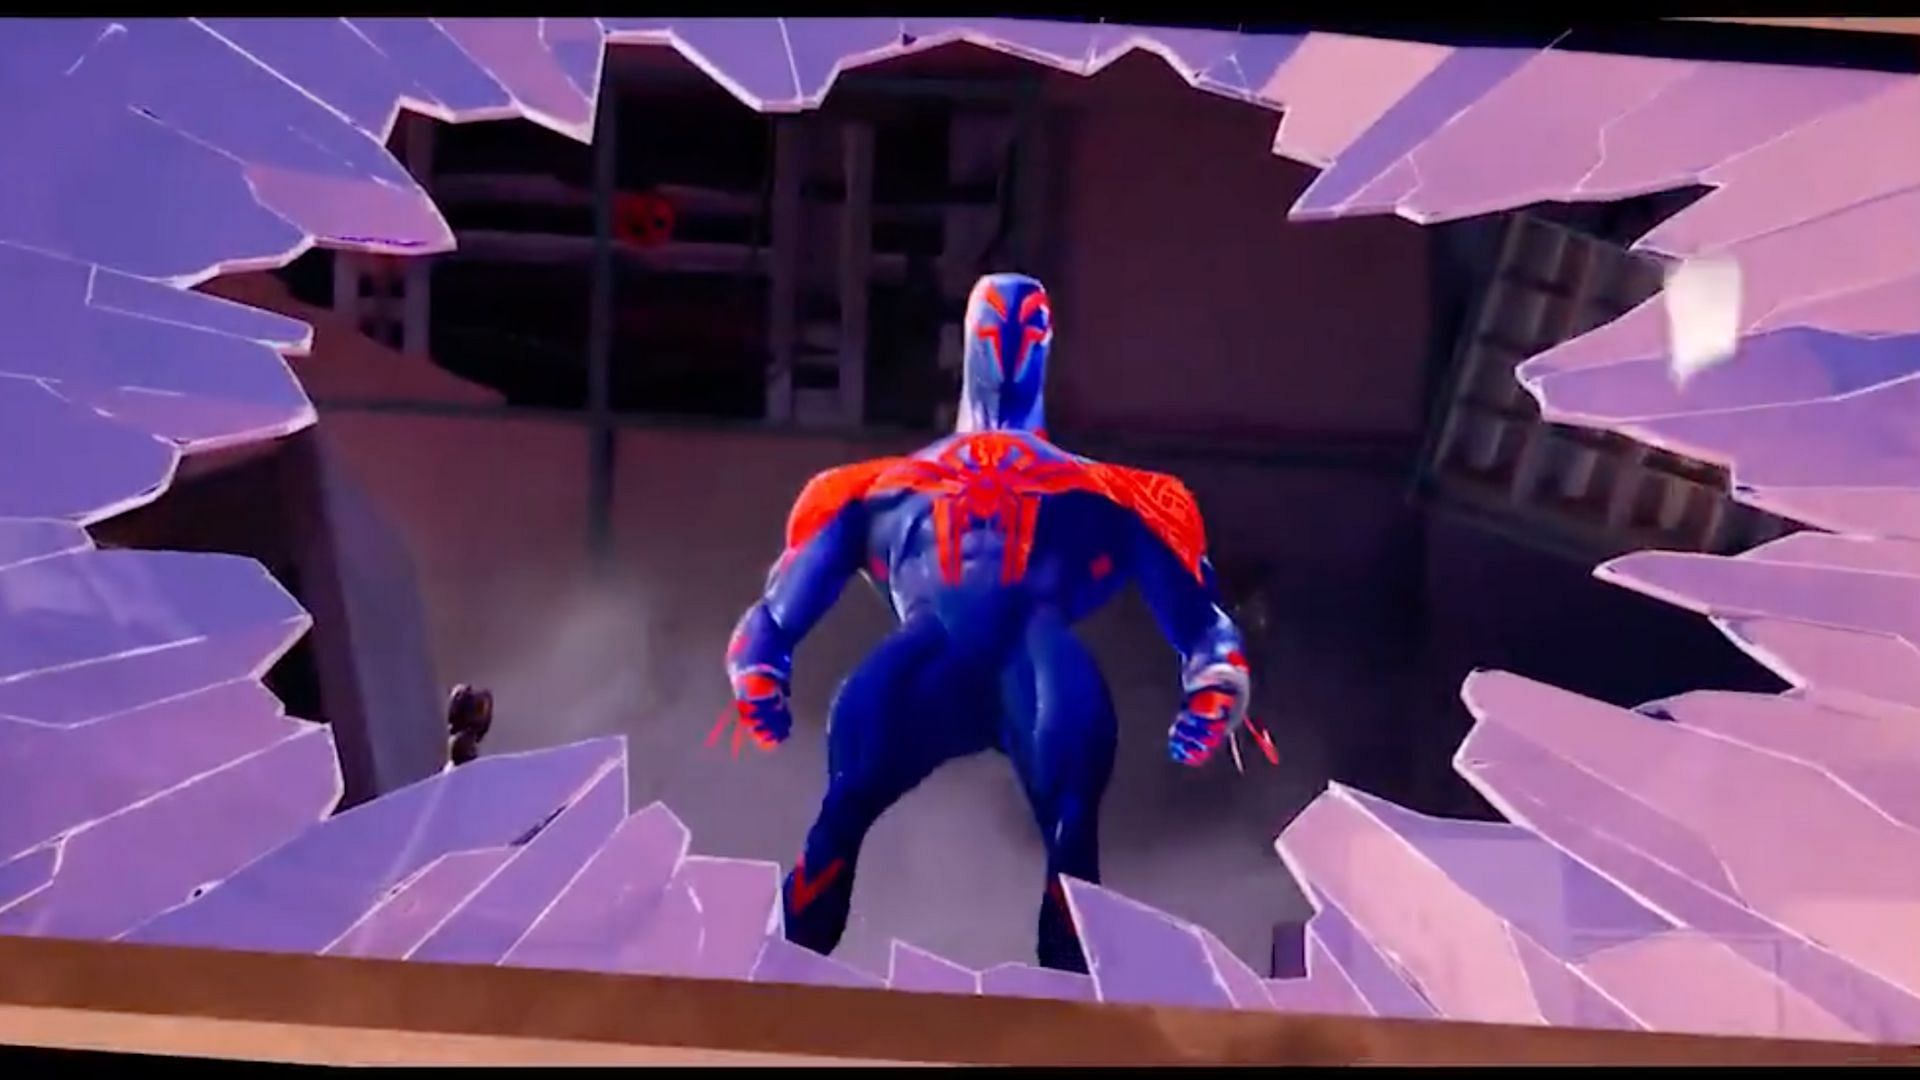 Spider-Man 2099 is coming to Fortnite (Image via HYPEX on Twitter)